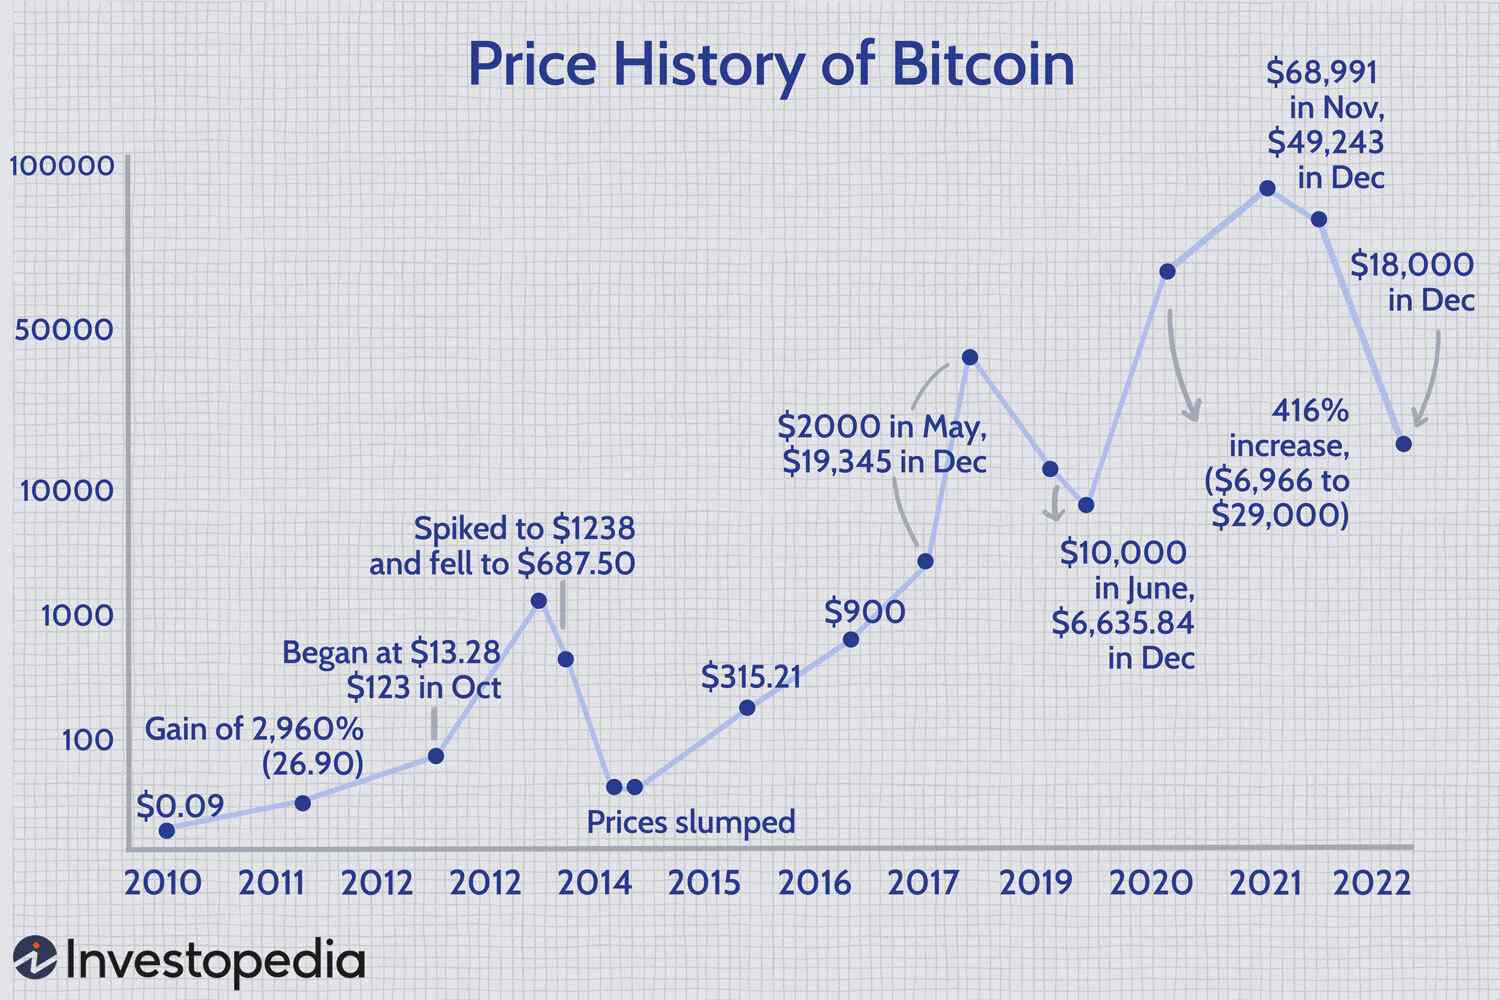 Cryptocurrency bubble - Wikipedia